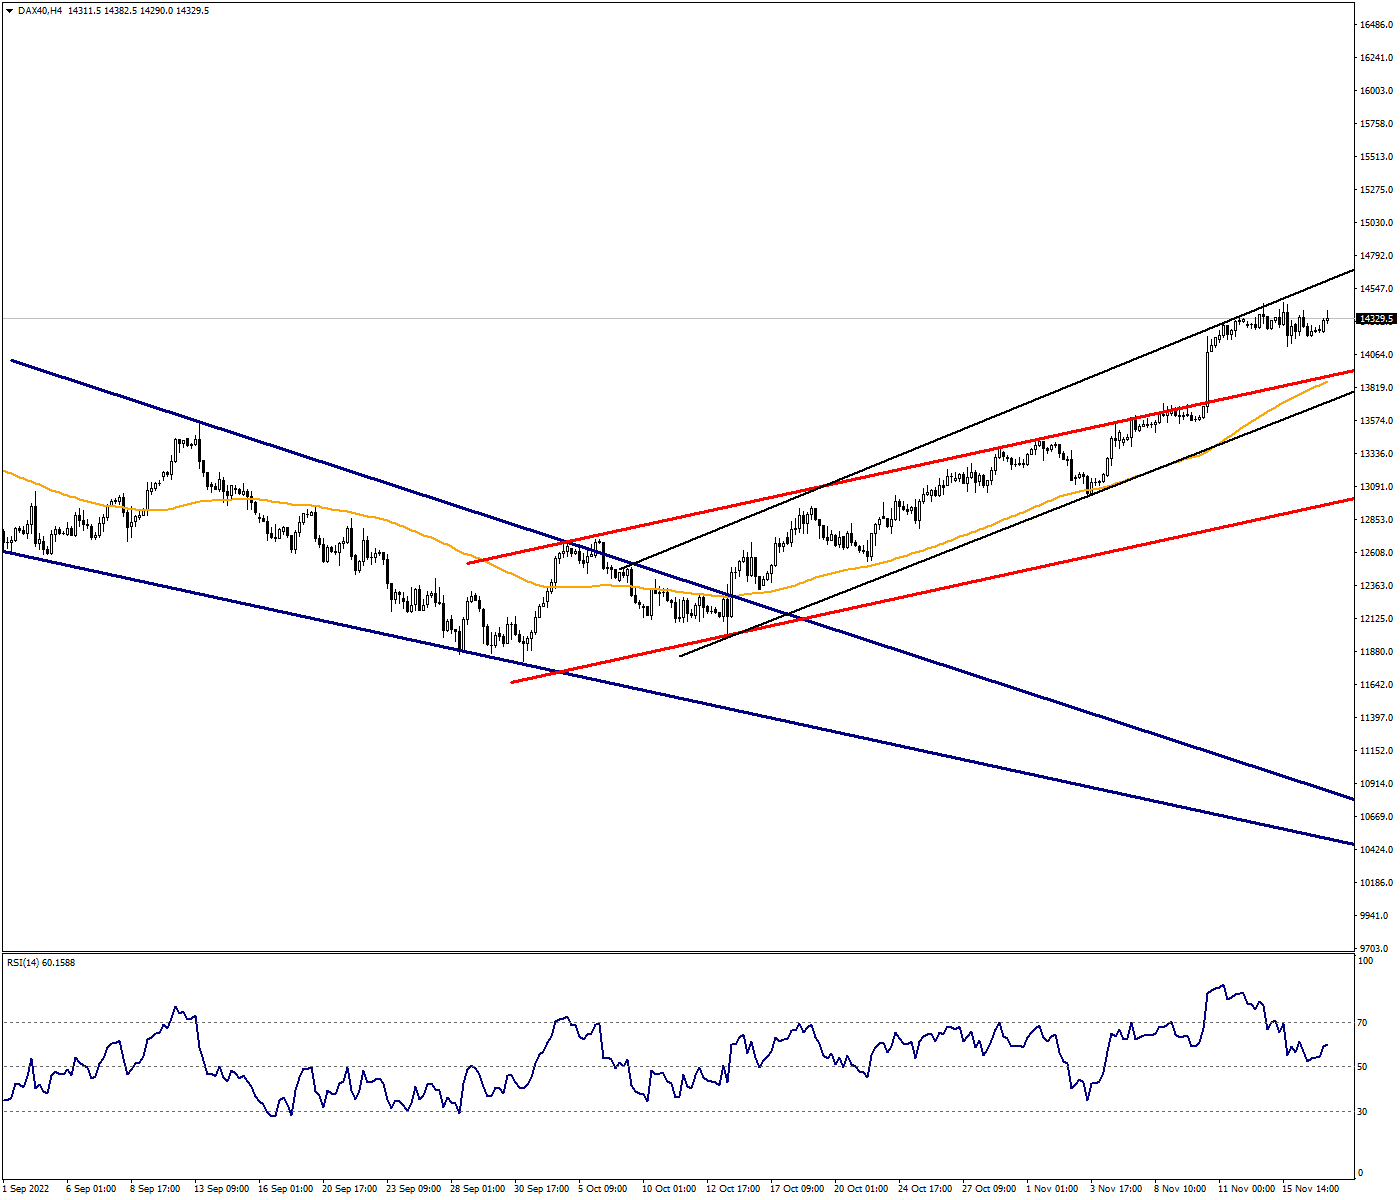 Uptrend Potential Continues in DAX40